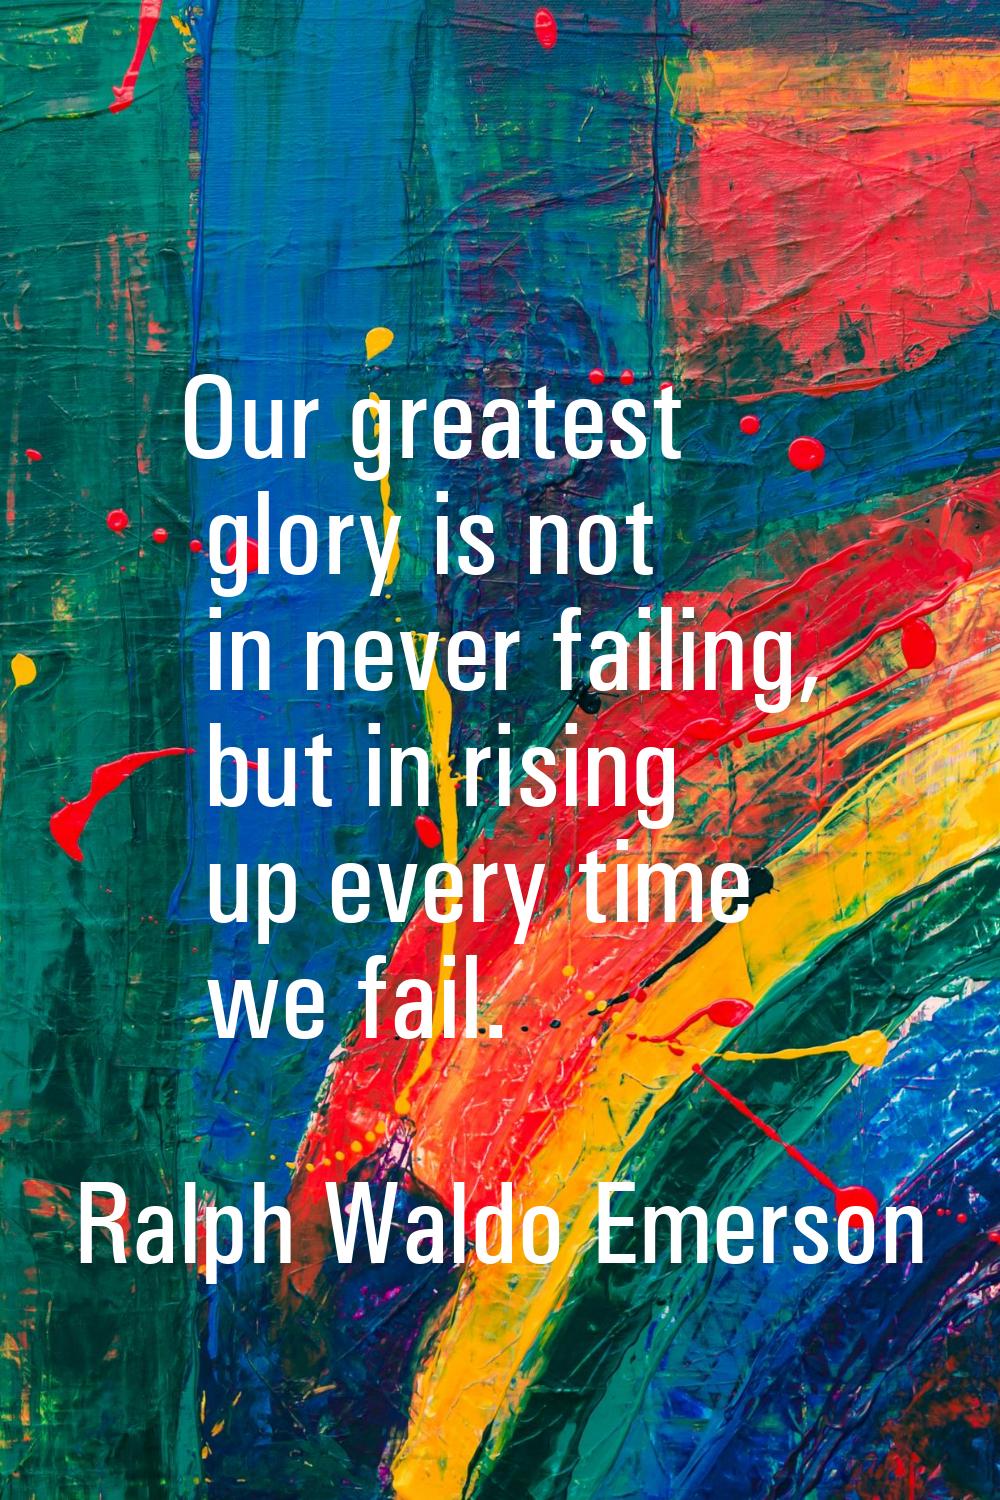 Our greatest glory is not in never failing, but in rising up every time we fail.